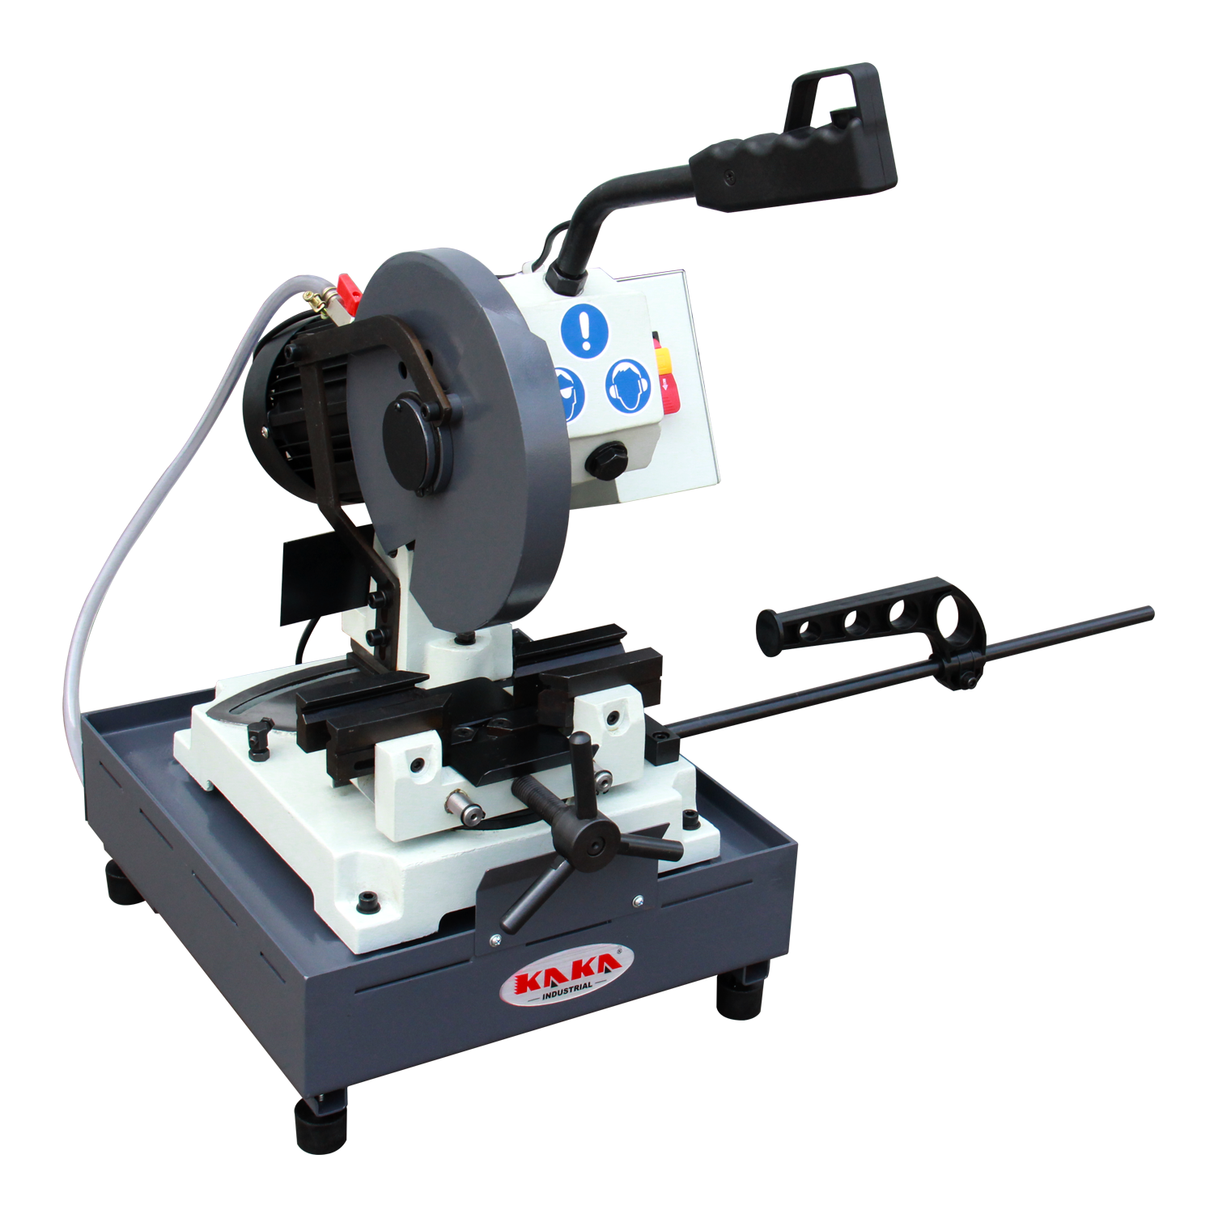 Achieve precision cuts with the swivel head and 45° rotation capability, perfect for industrial metal cutting.